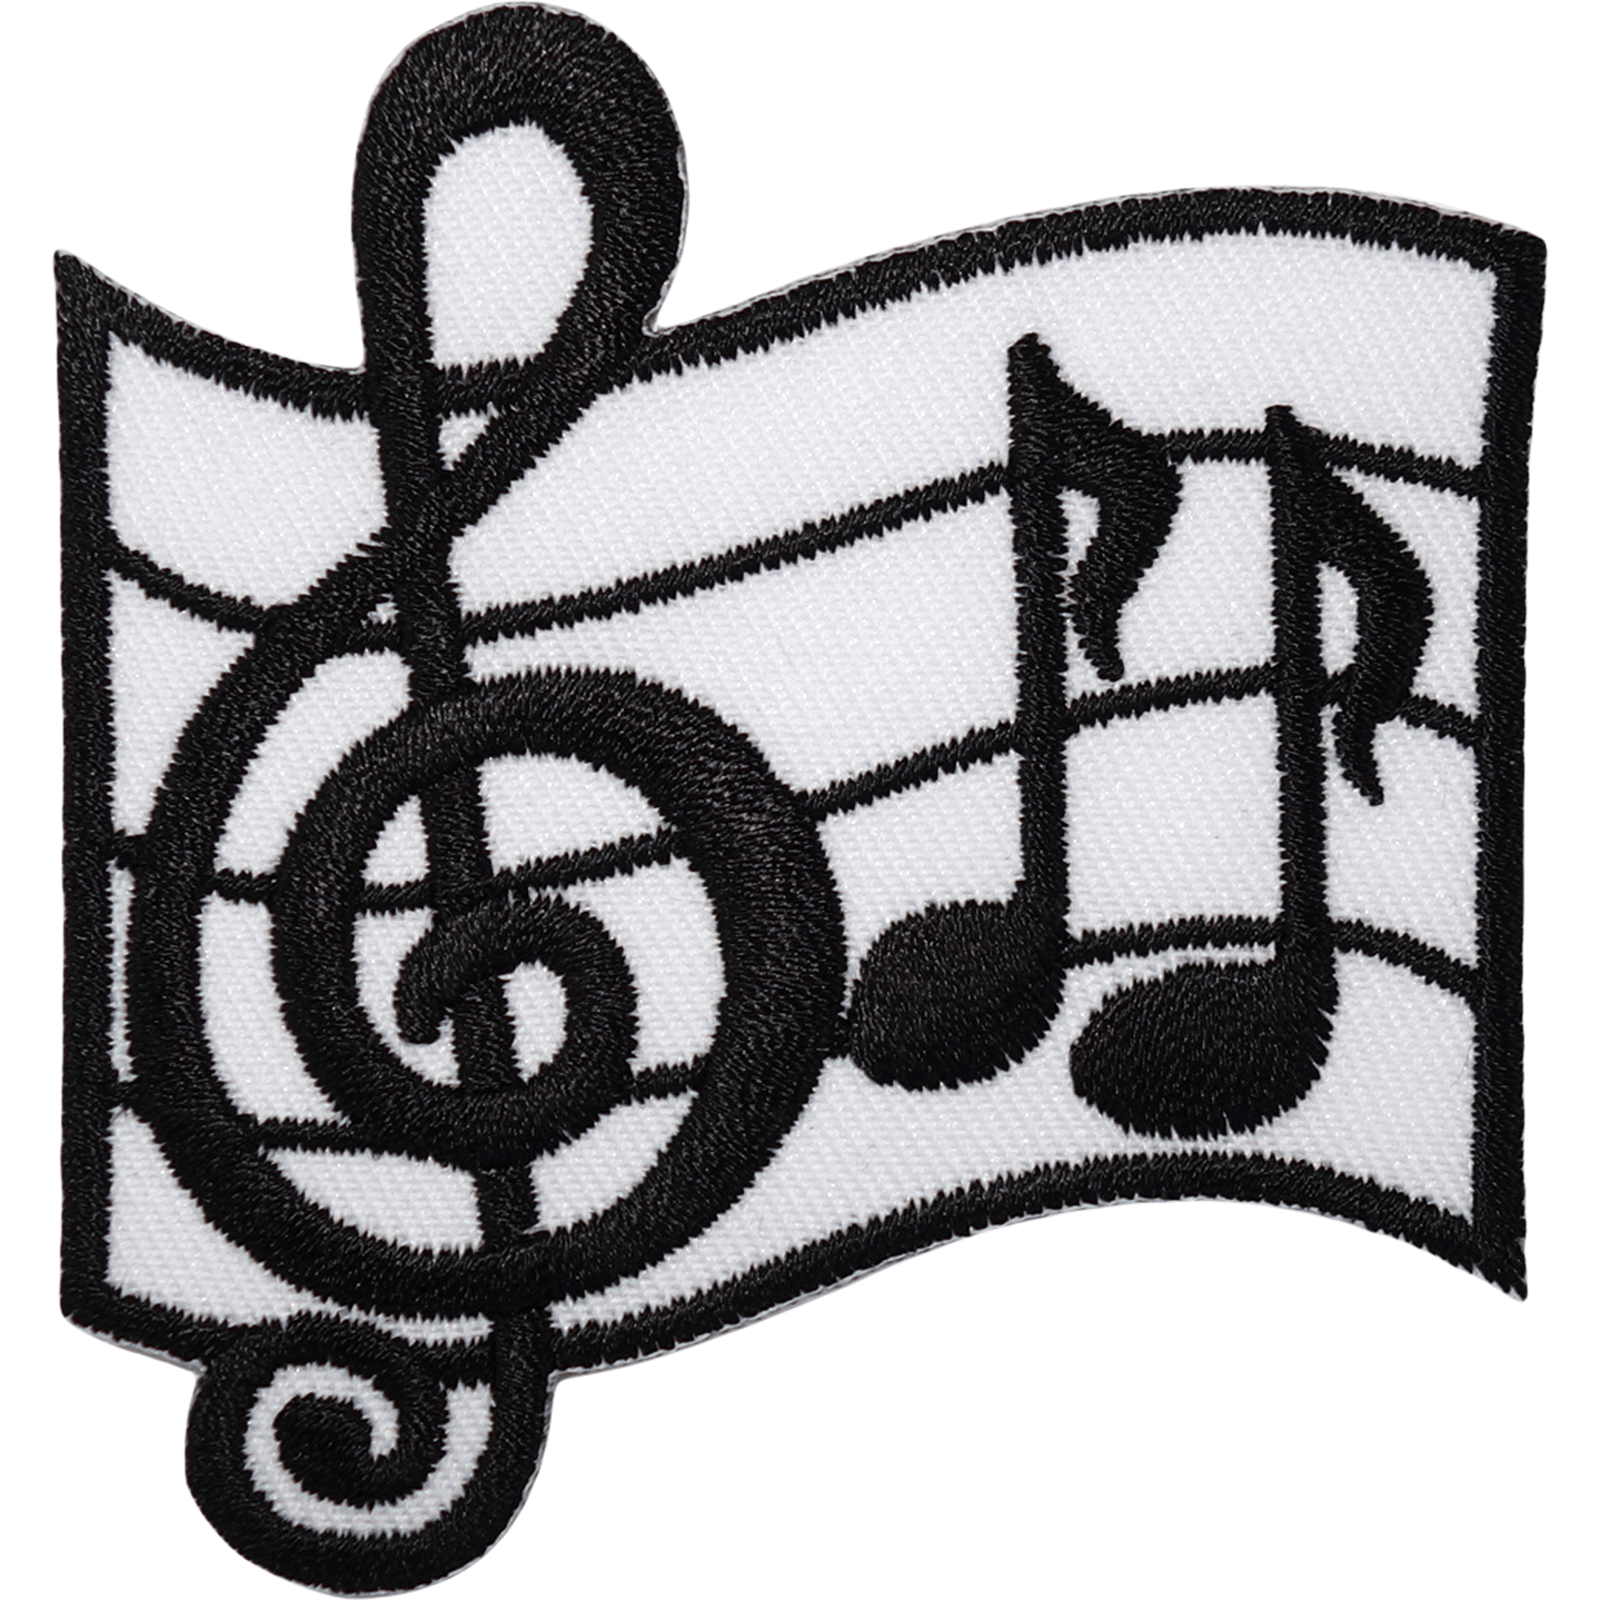 Music Notes Patch Iron Sew On White Black Embroidered Badge Musical Song Sheet